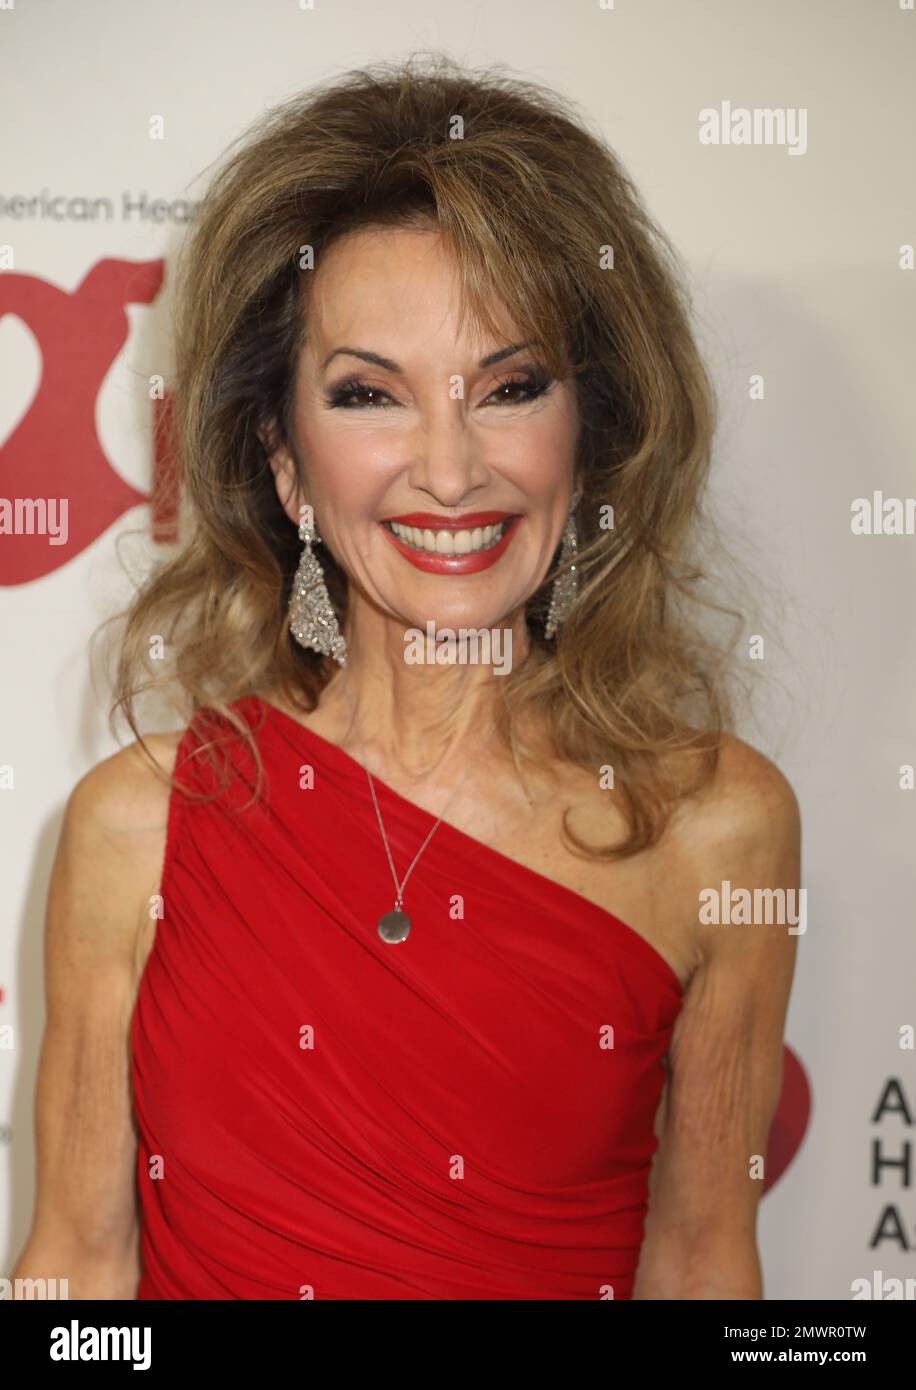 What did Susan Lucci say about her health? | The Sun